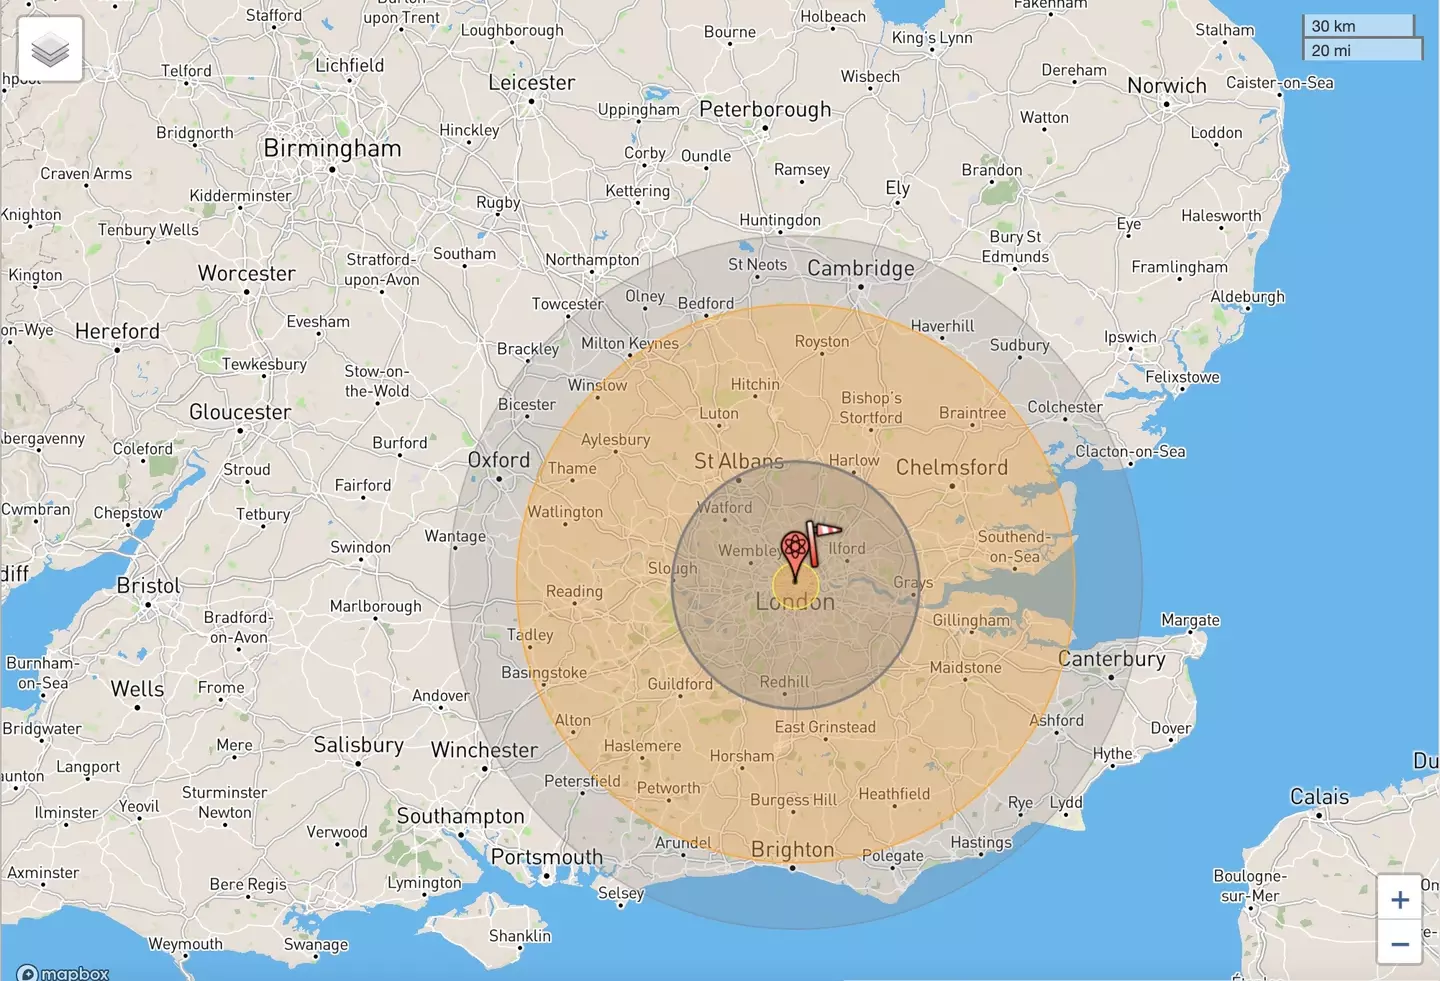 One particular website, NUKEMAP, shows what could be the Tsar Bomba’s fallout from England’s capital reaching as far as Cambridge, Canterbury, Brighton, Winchester and Oxford and causing around 5,920,060 if it were to be detonated, according to the site.